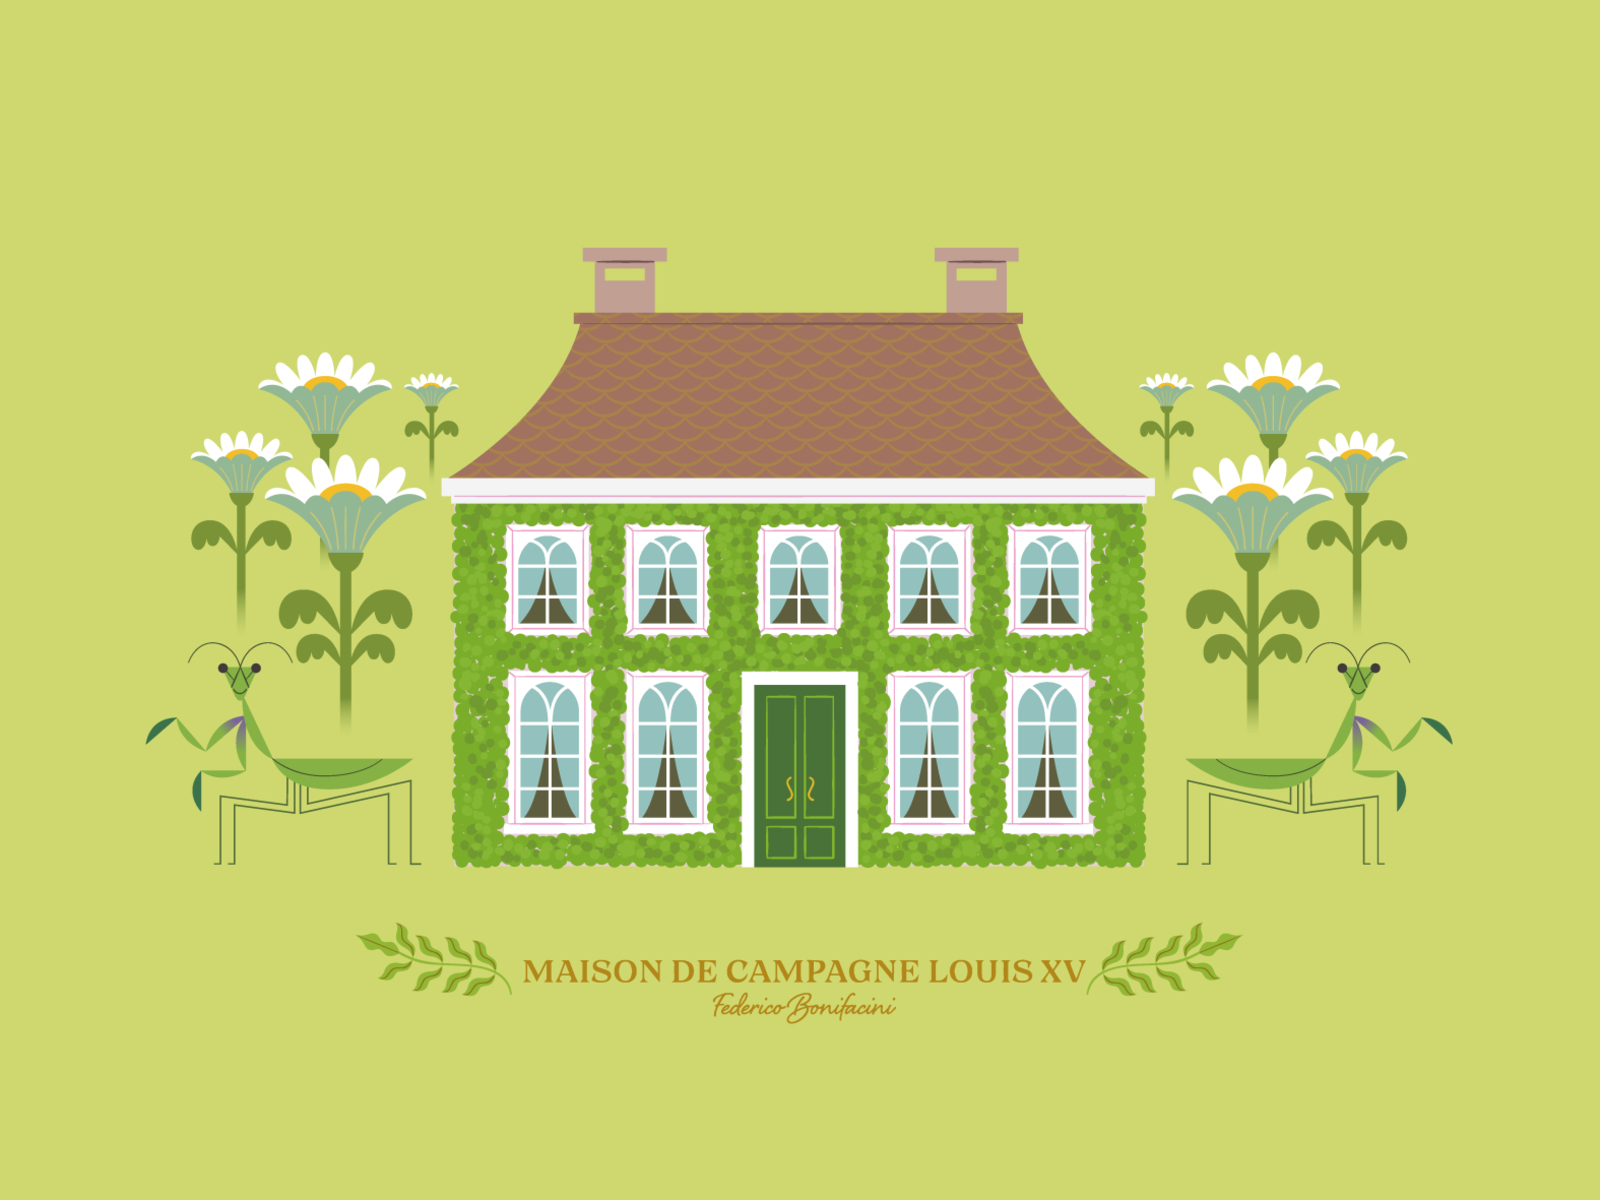 Maison de Campagne Louis XV insects mansion houses artdirection design art print stylish green insect mantis flowers plants illustration maison house